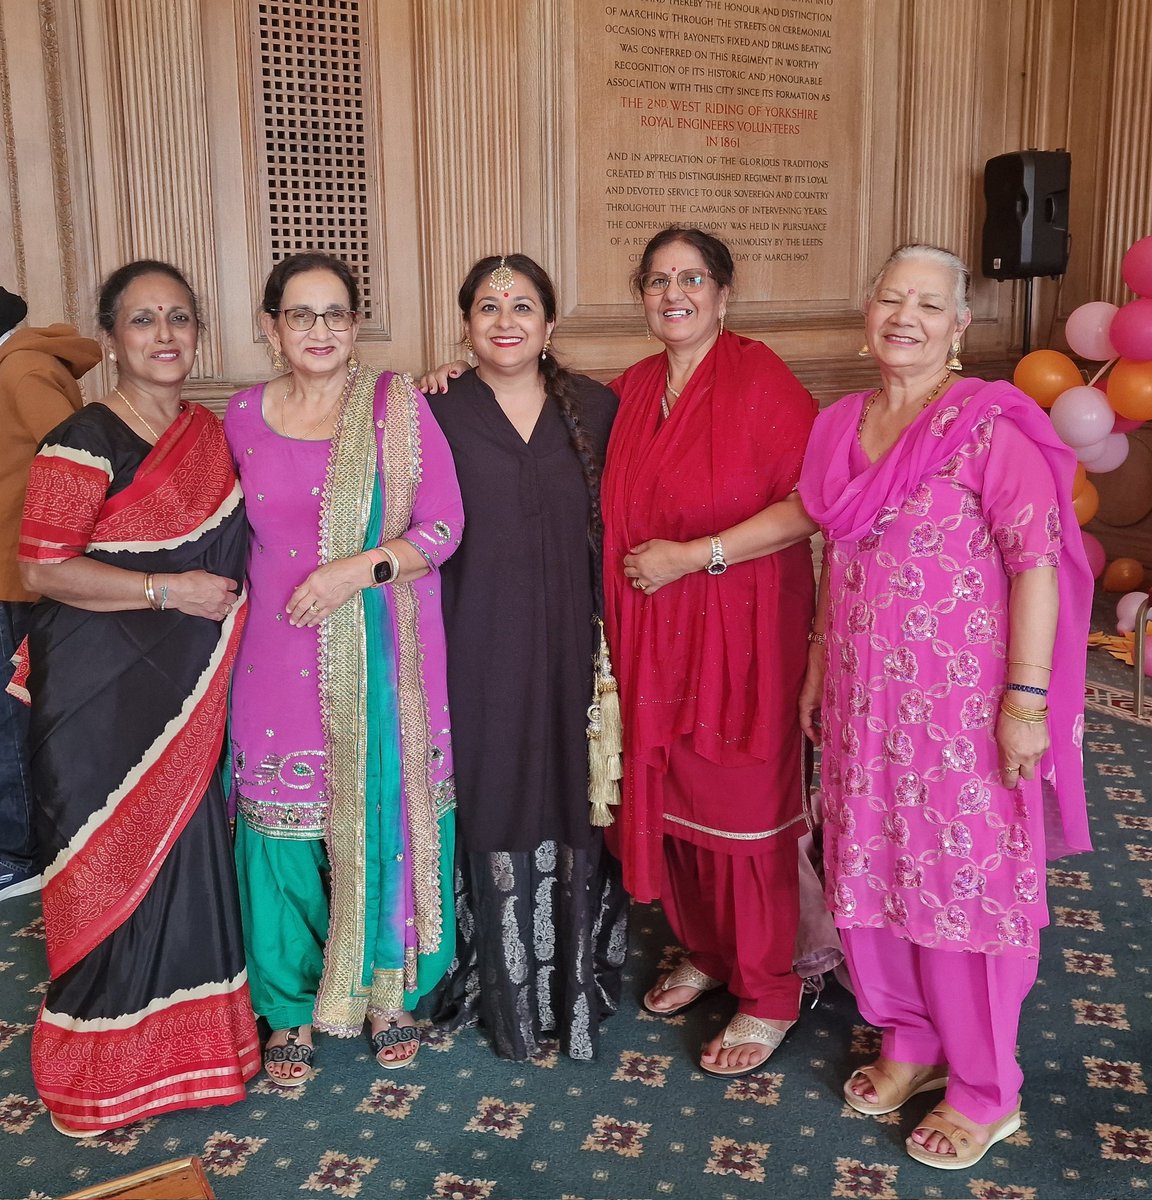 What a wonderful day celebrating cultures & sharing stories of South Asian Communities in Leeds.
A play 'Flight to UK' from @sikhelders followed by dance workshops, poetry & stories with @ABALeeds
@SAHM_UK @Touchstone_Spt @LEEDS_2023 @LCC_BAME 
#stories #SouthAsianHeritageMonth